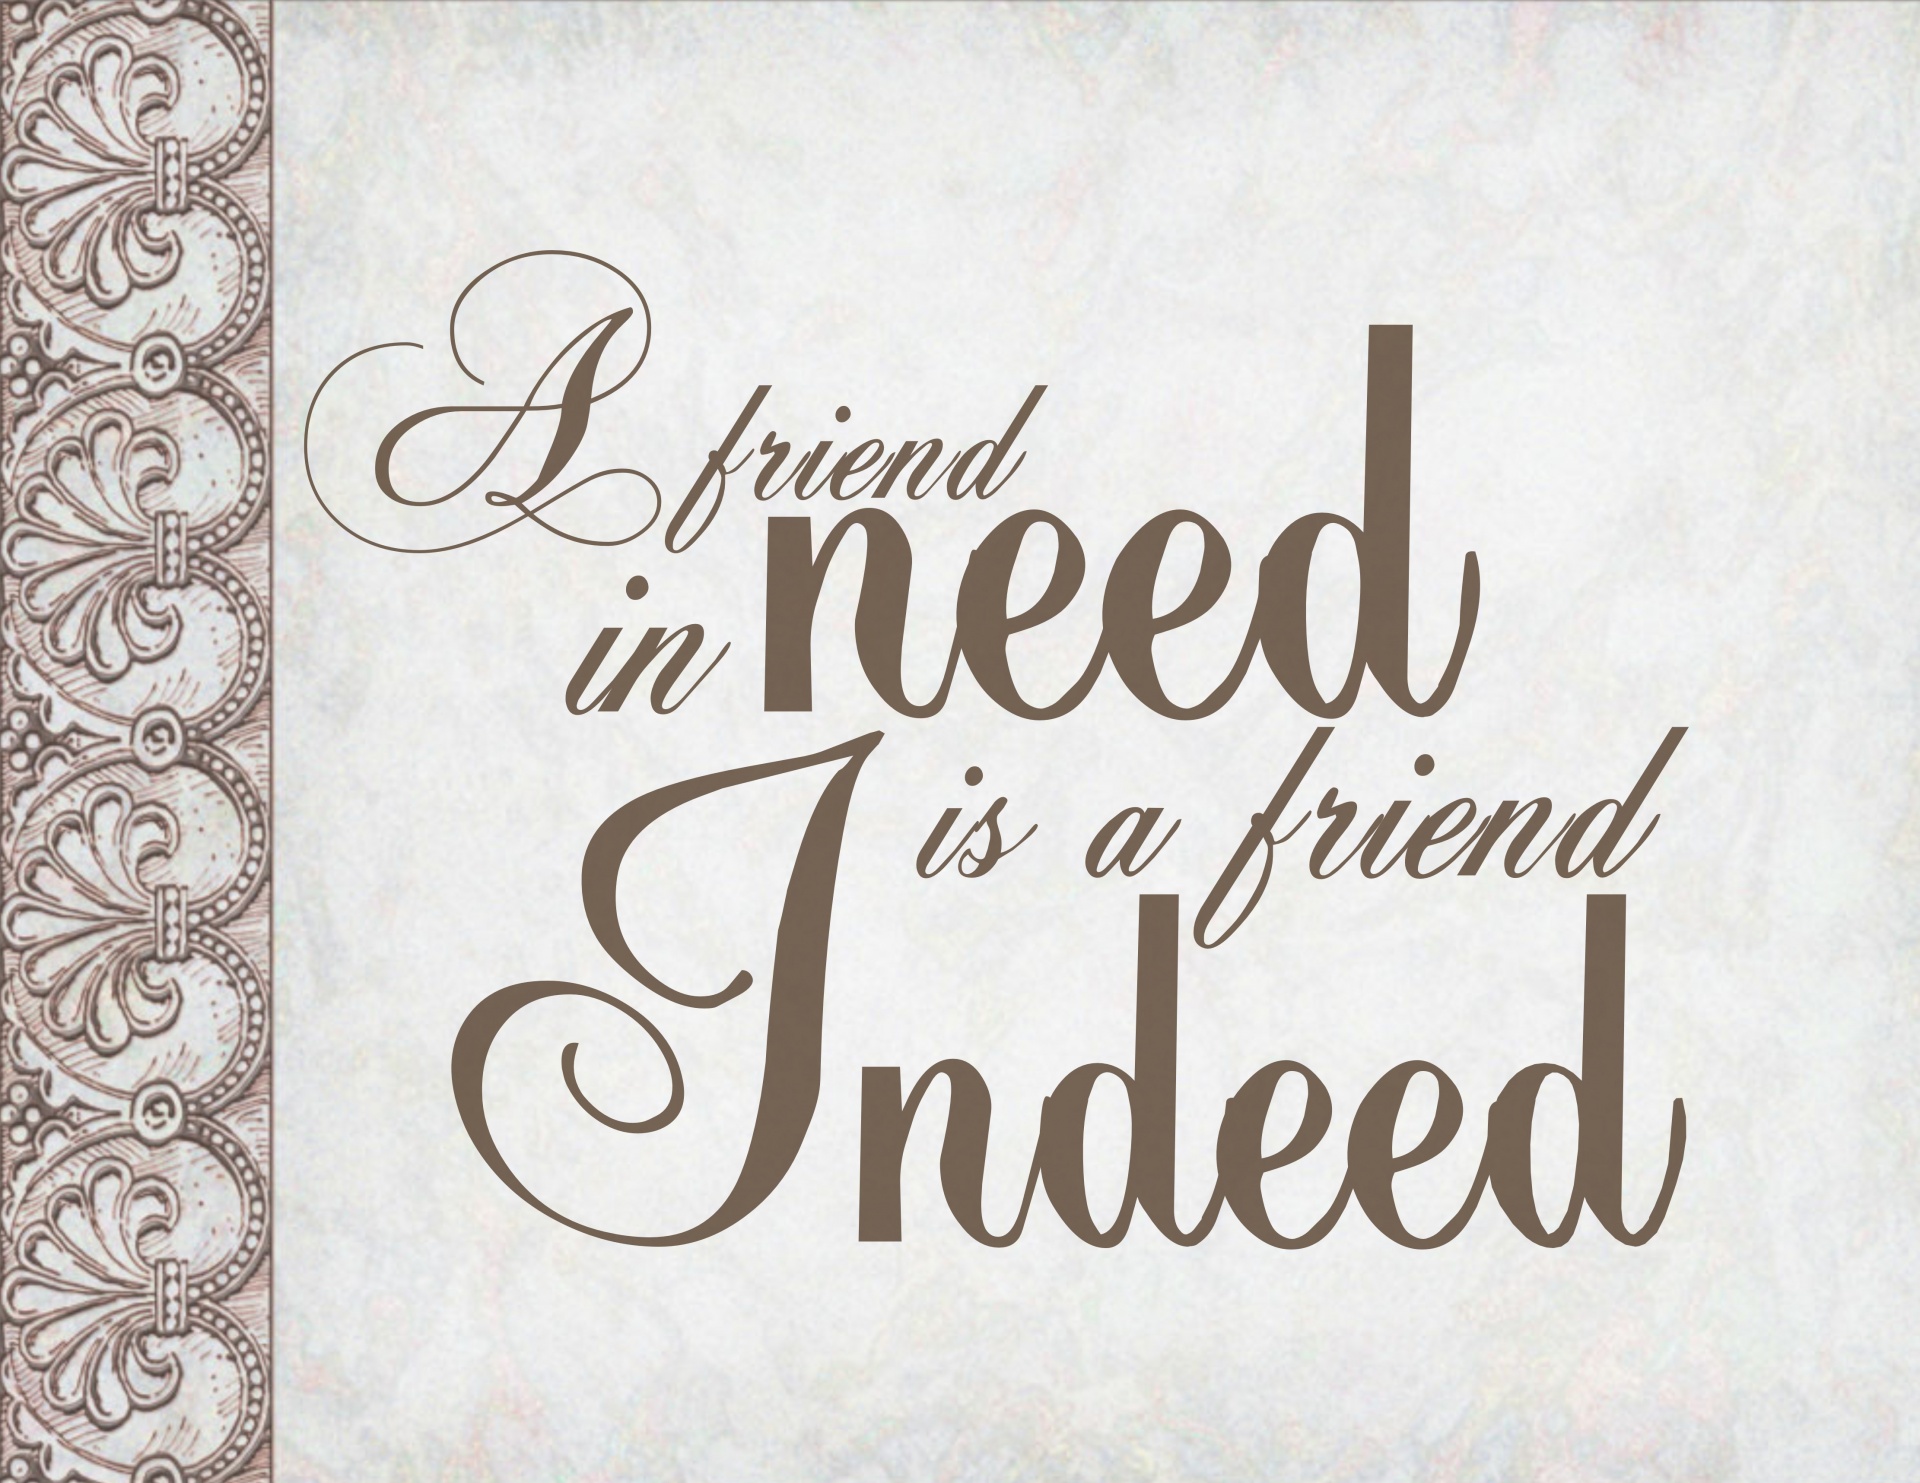 quote-friends-calligraphy-message.jpg